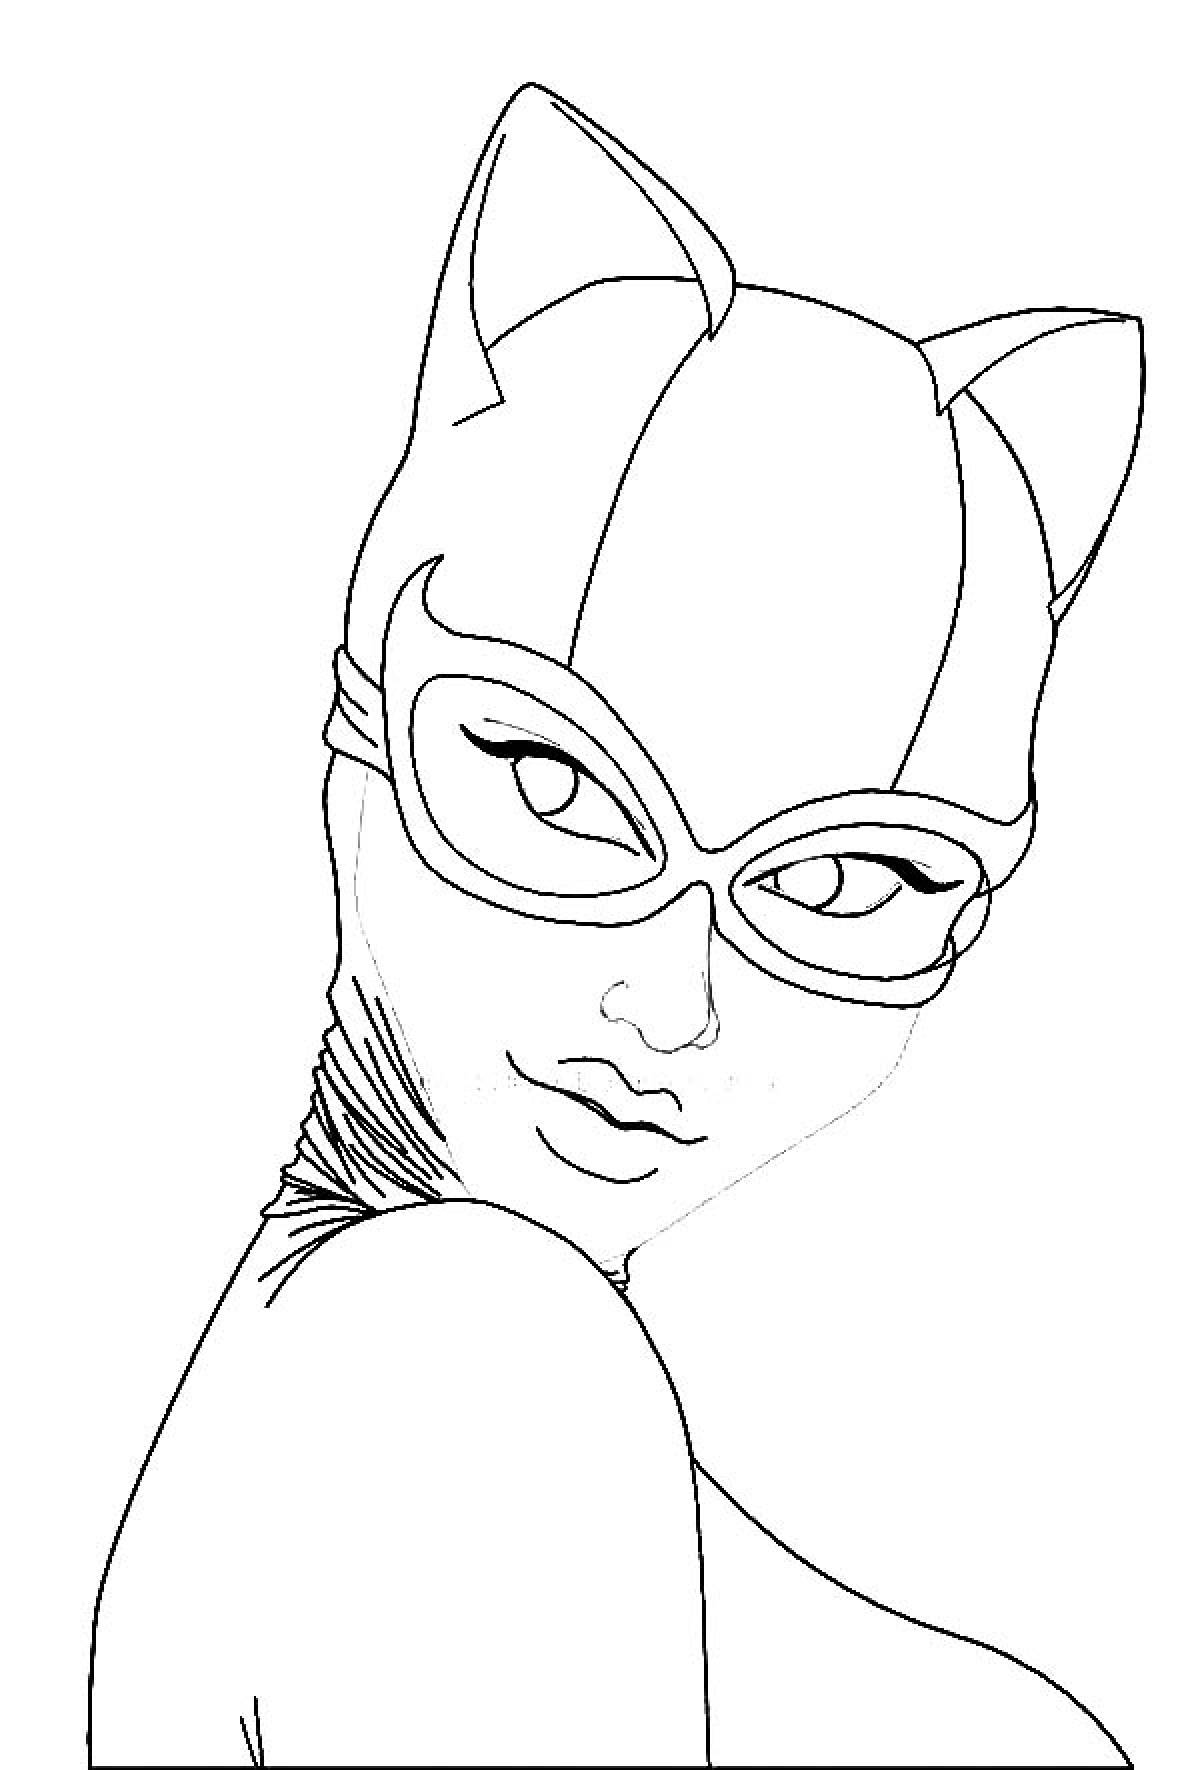 Coloring page graceful cat lady